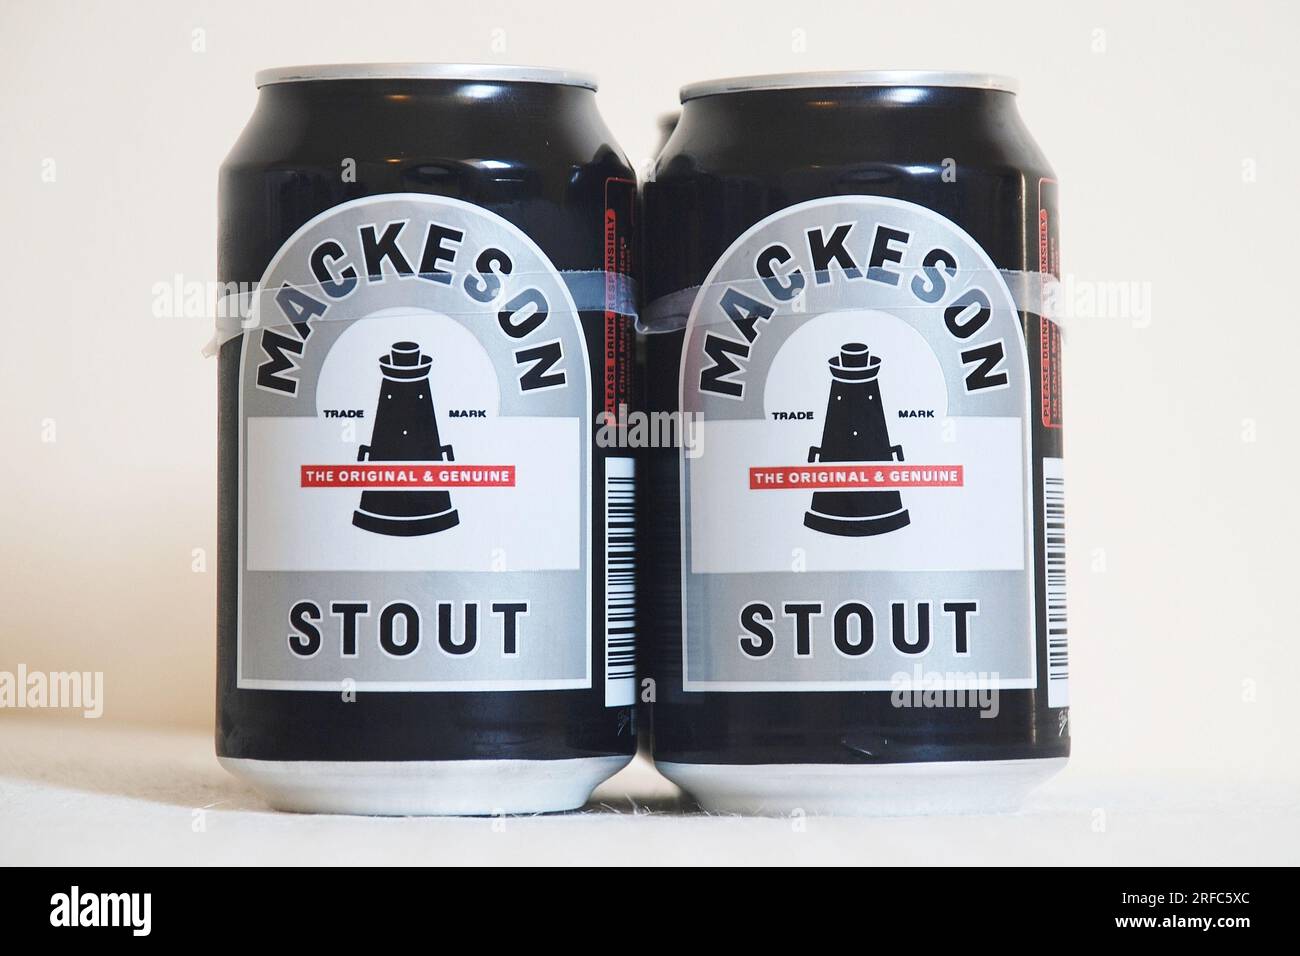 A pack of Mackeson Stout beer. Known as Milk Stout because of the lactose content, the brand was first brewed in 1909 by the Mackeson brewery at Hythe in Kent, England. Stock Photo